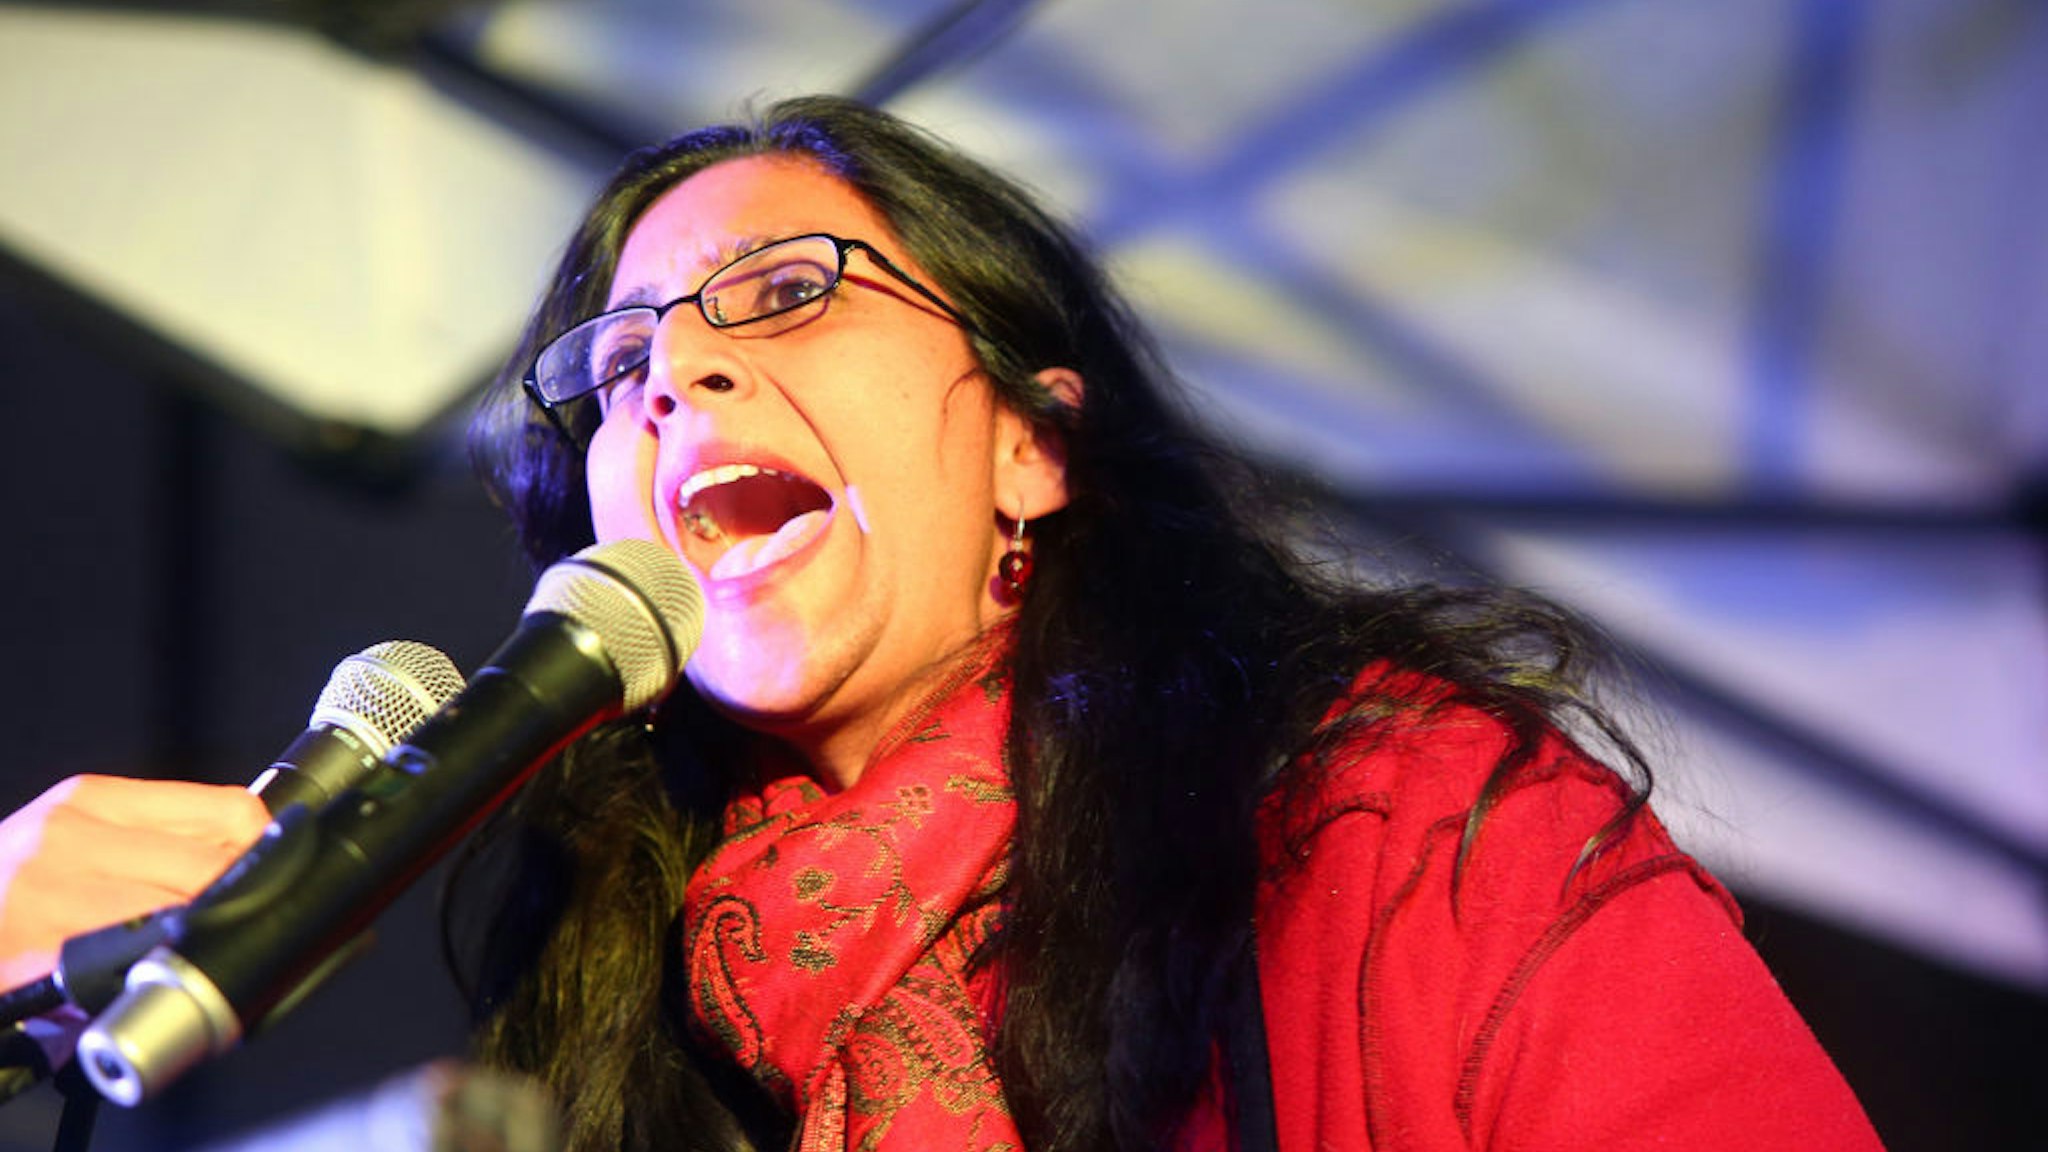 Seattle City Councilmember Kshama Sawant speaks at rally at Westlake Center on March 8, 2017 in Seattle, Washington.